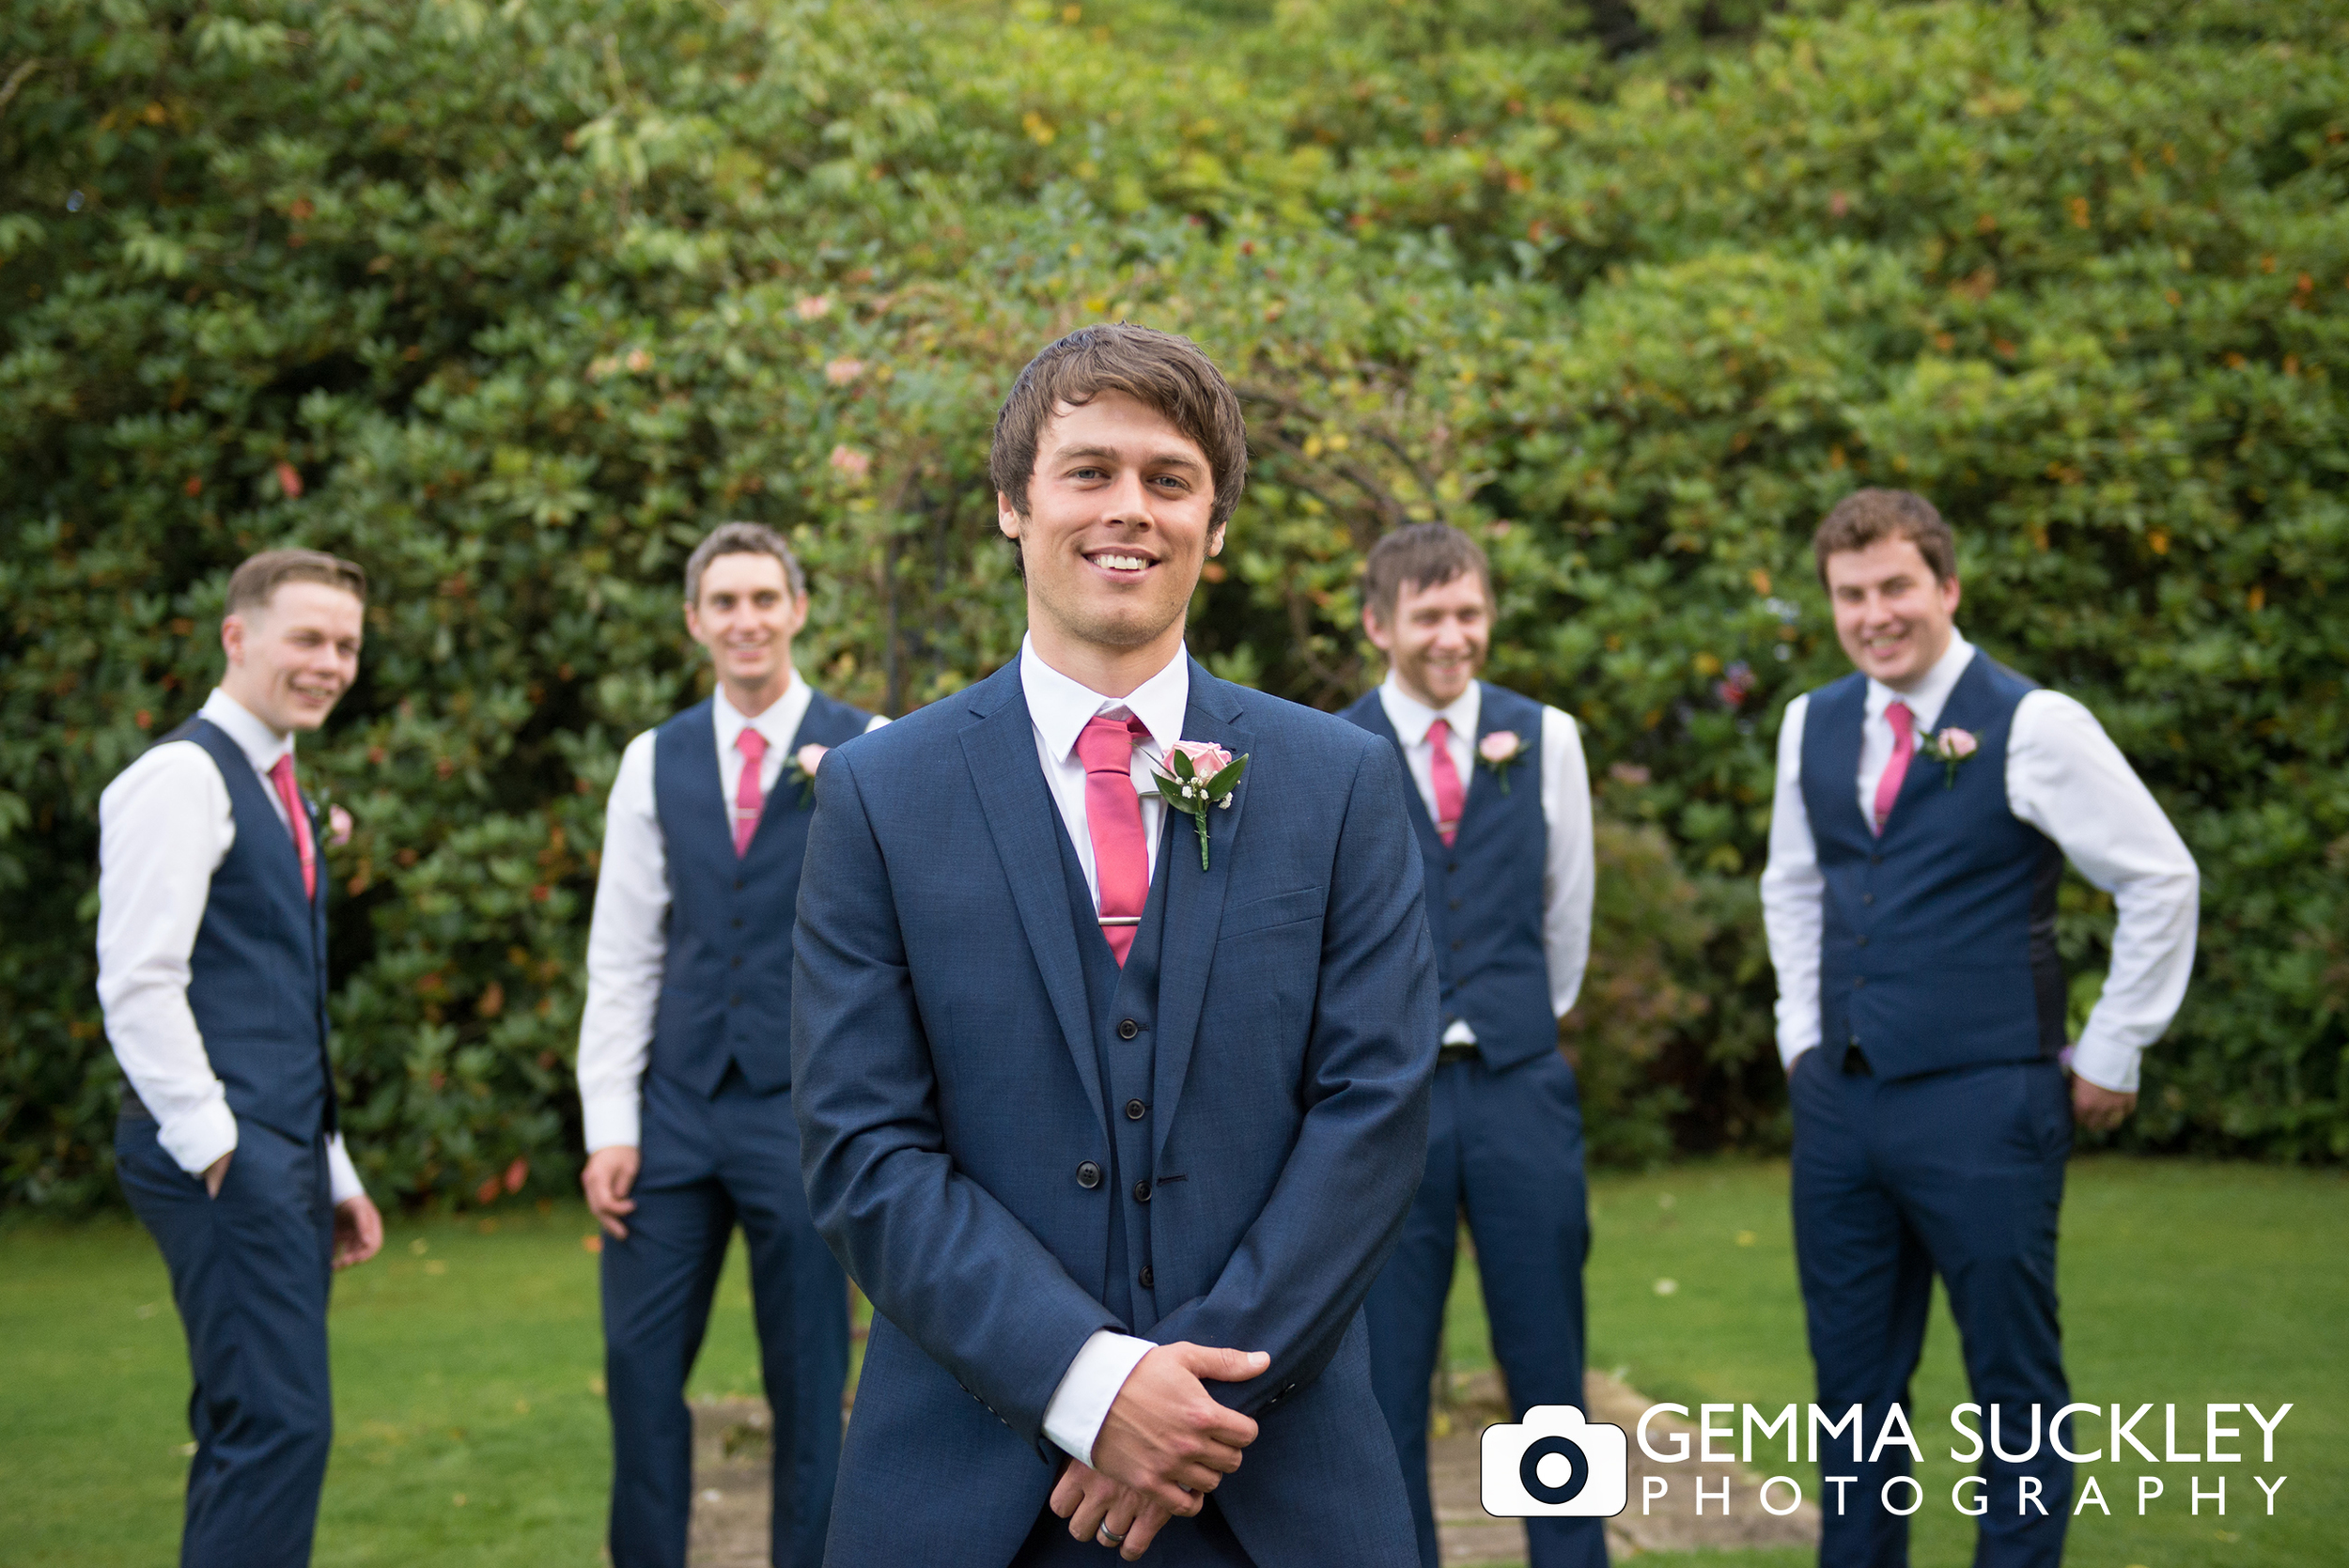 the groom and groom's party wearing pink buttonhole flowers